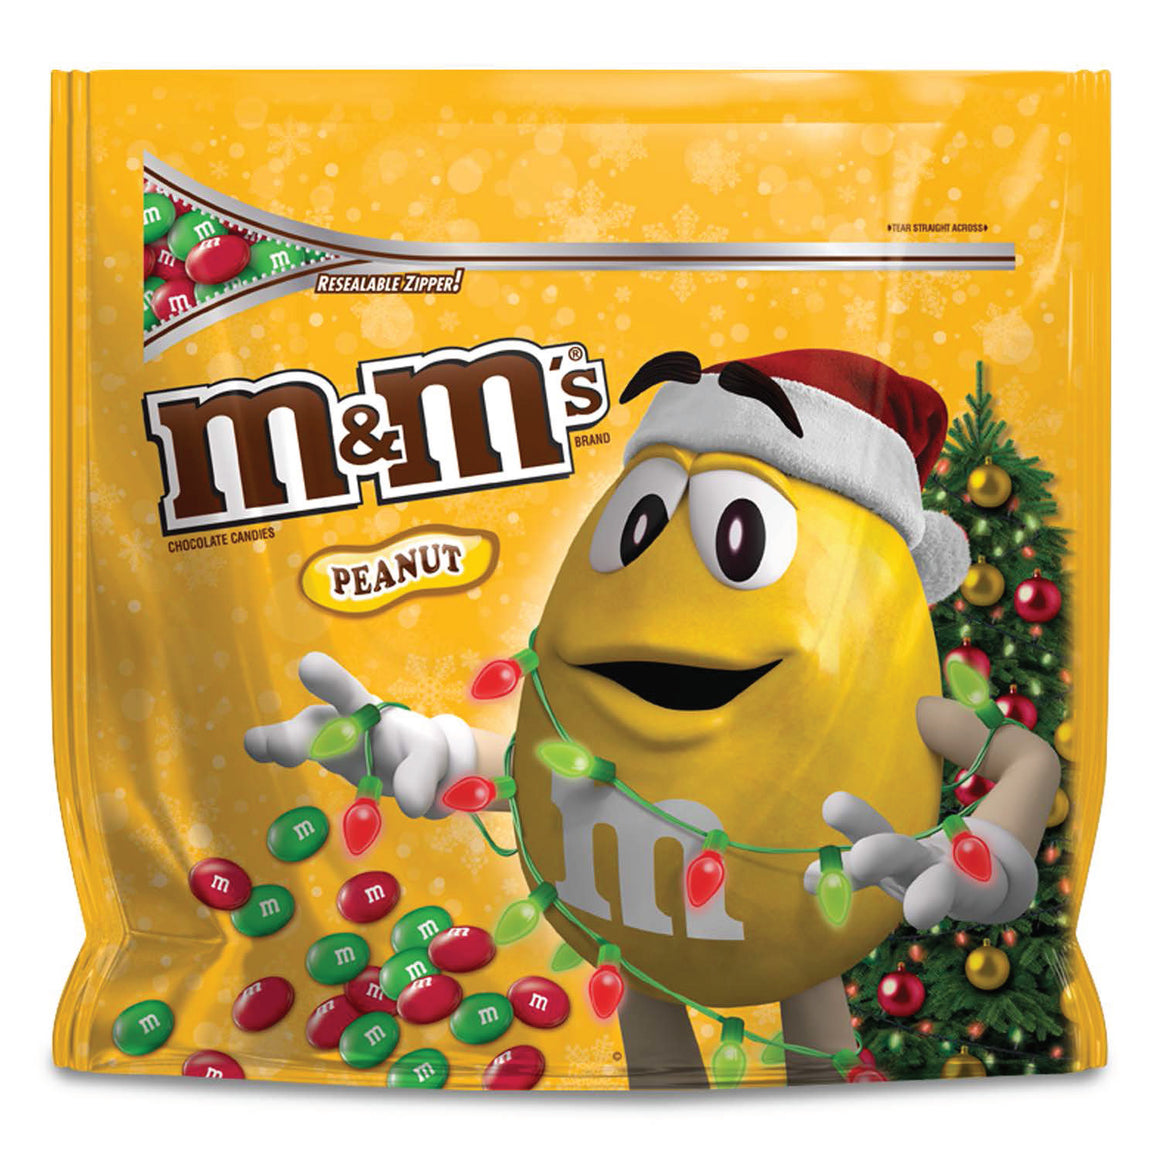 All City Candy M&M's Peanut Christmas Colors - 38-oz. Party Bag Mars Chocolate For fresh candy and great service, visit www.allcitycandy.com